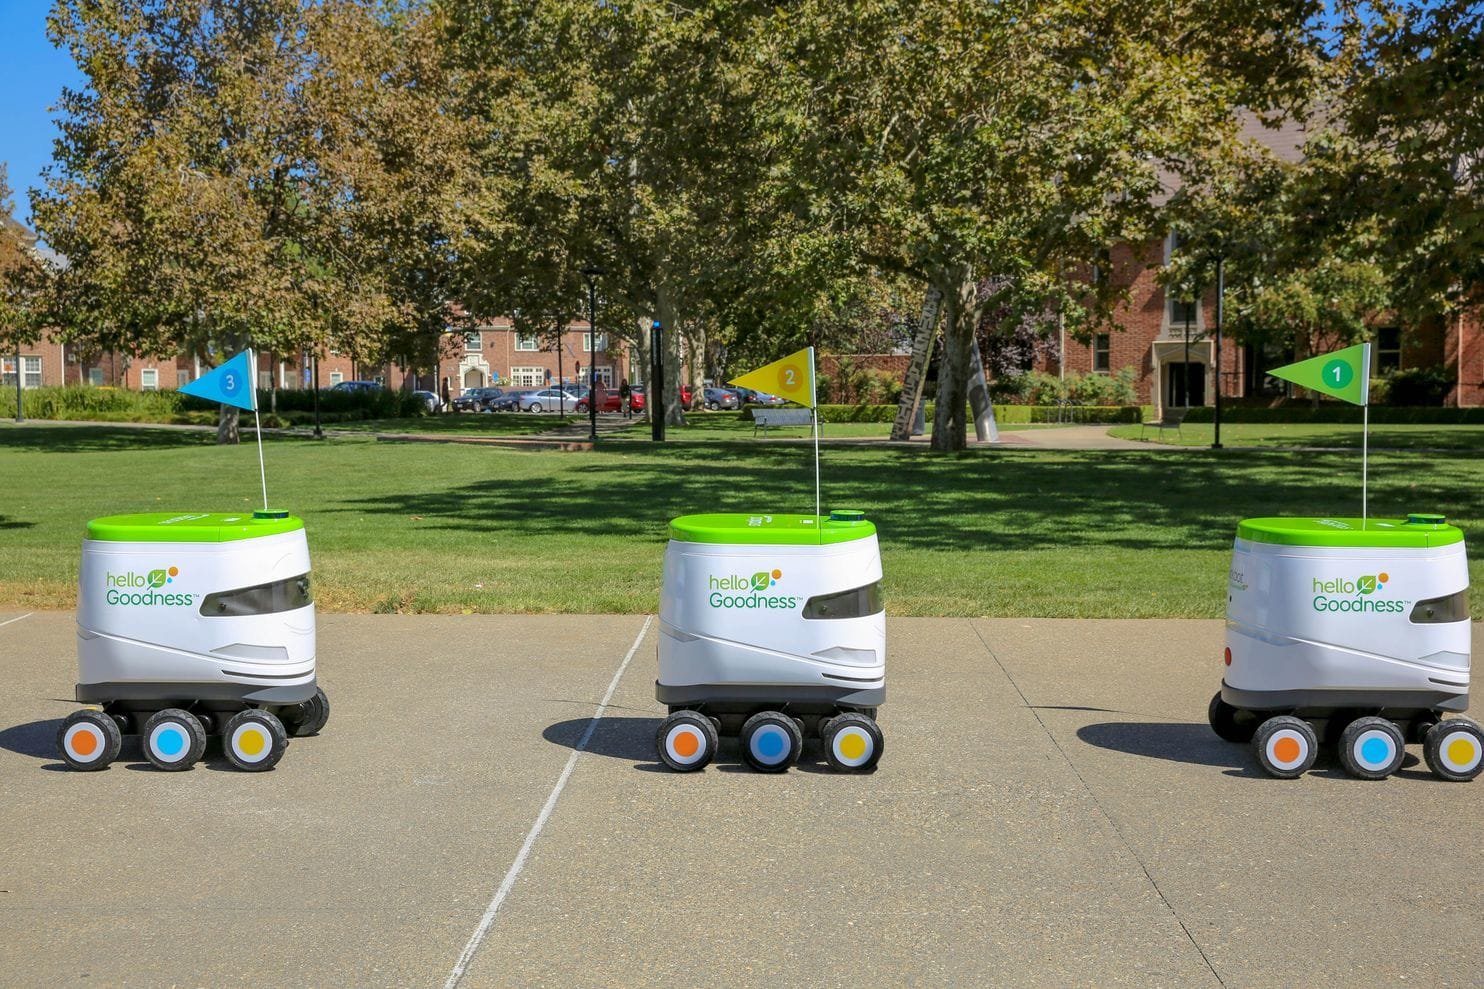 PepsiCo launches self-driving snackbot to college